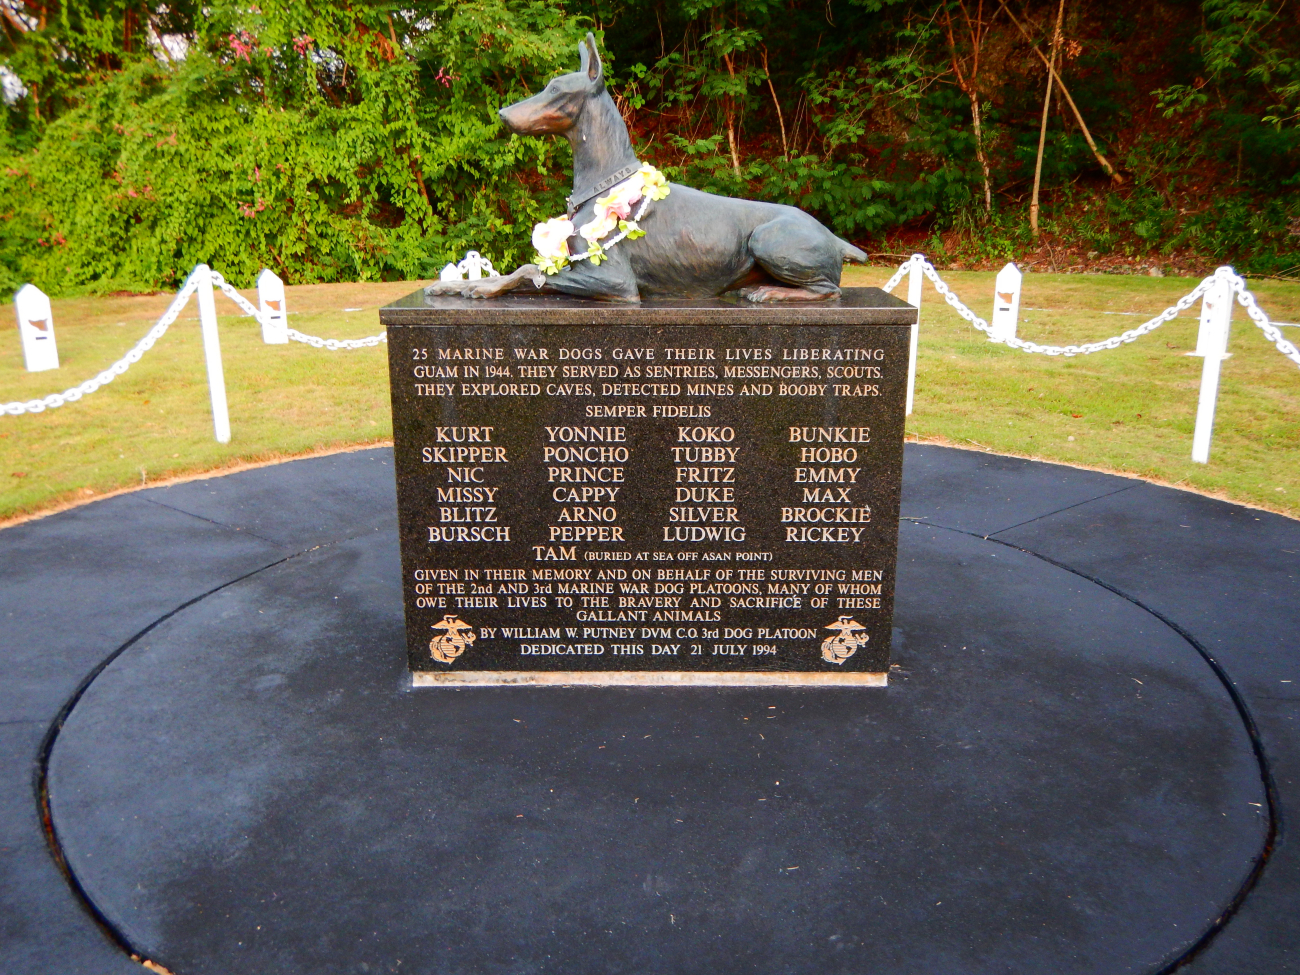 Memorial to the 25 Marine War Dogs that gave their lives liberating Guam in 1944